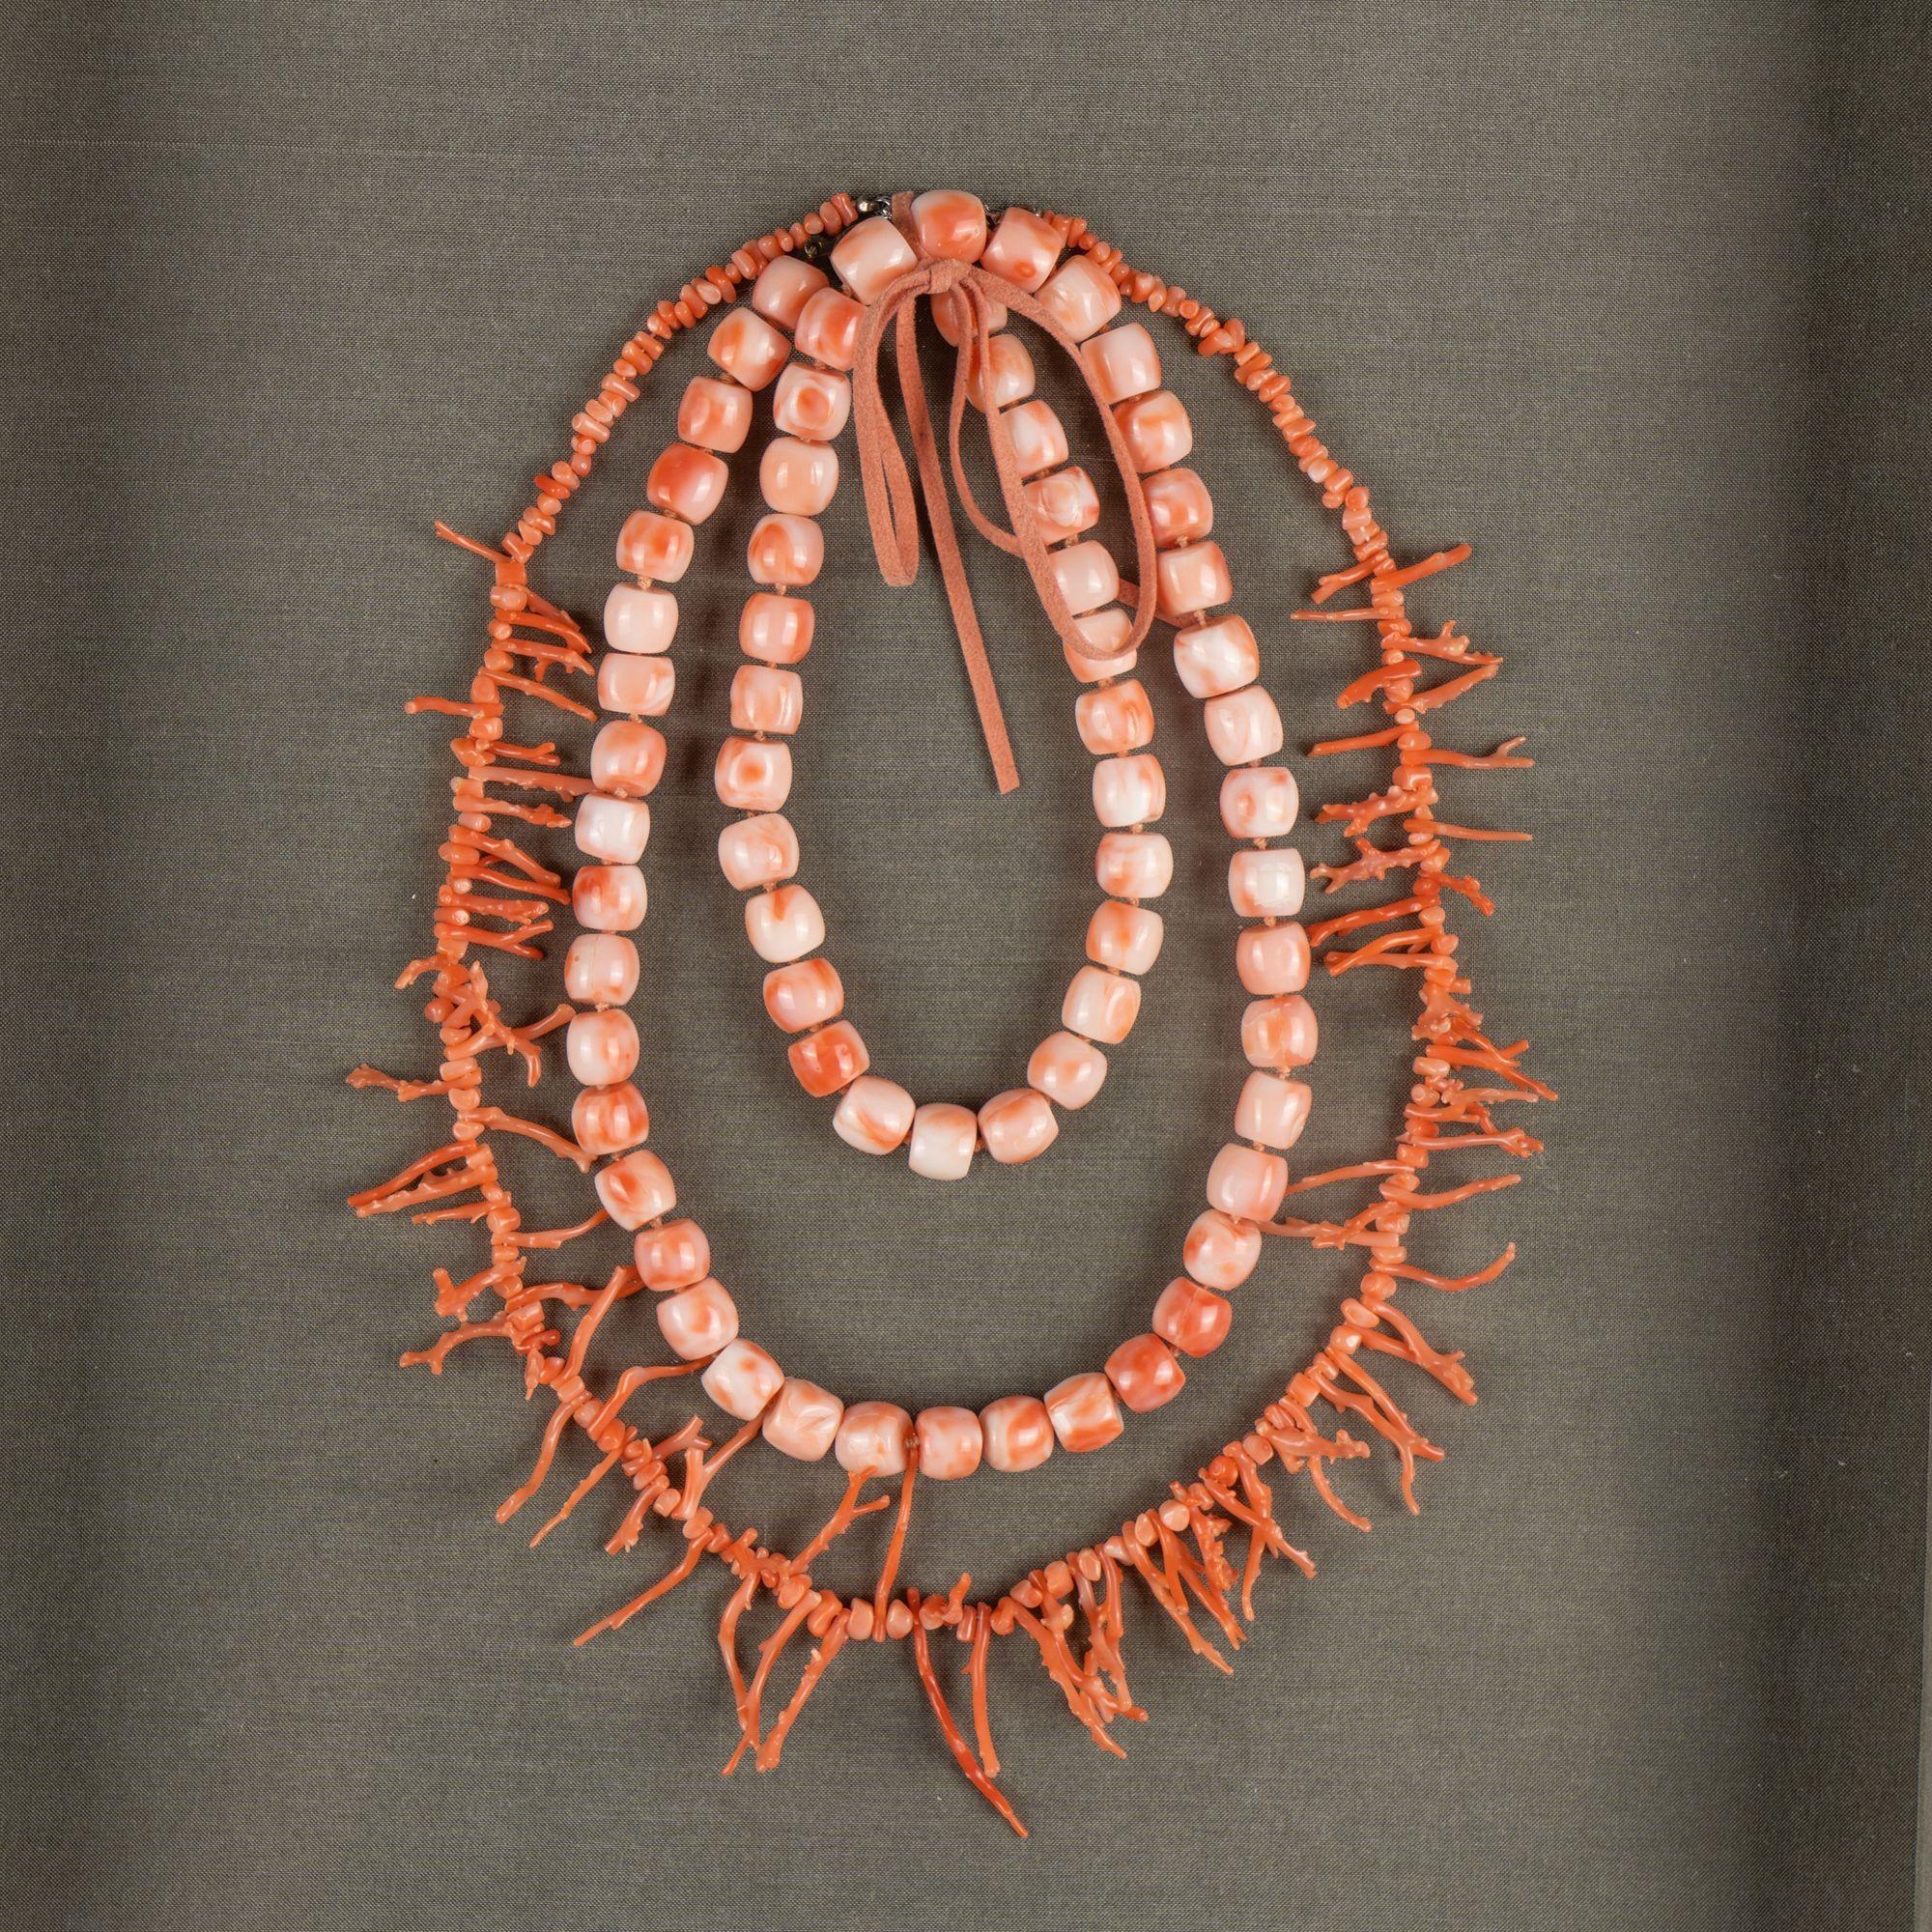 Branch coral and bead coral necklaces mounted on green linen and in a shadow box frame.

Italy, circa 1930.